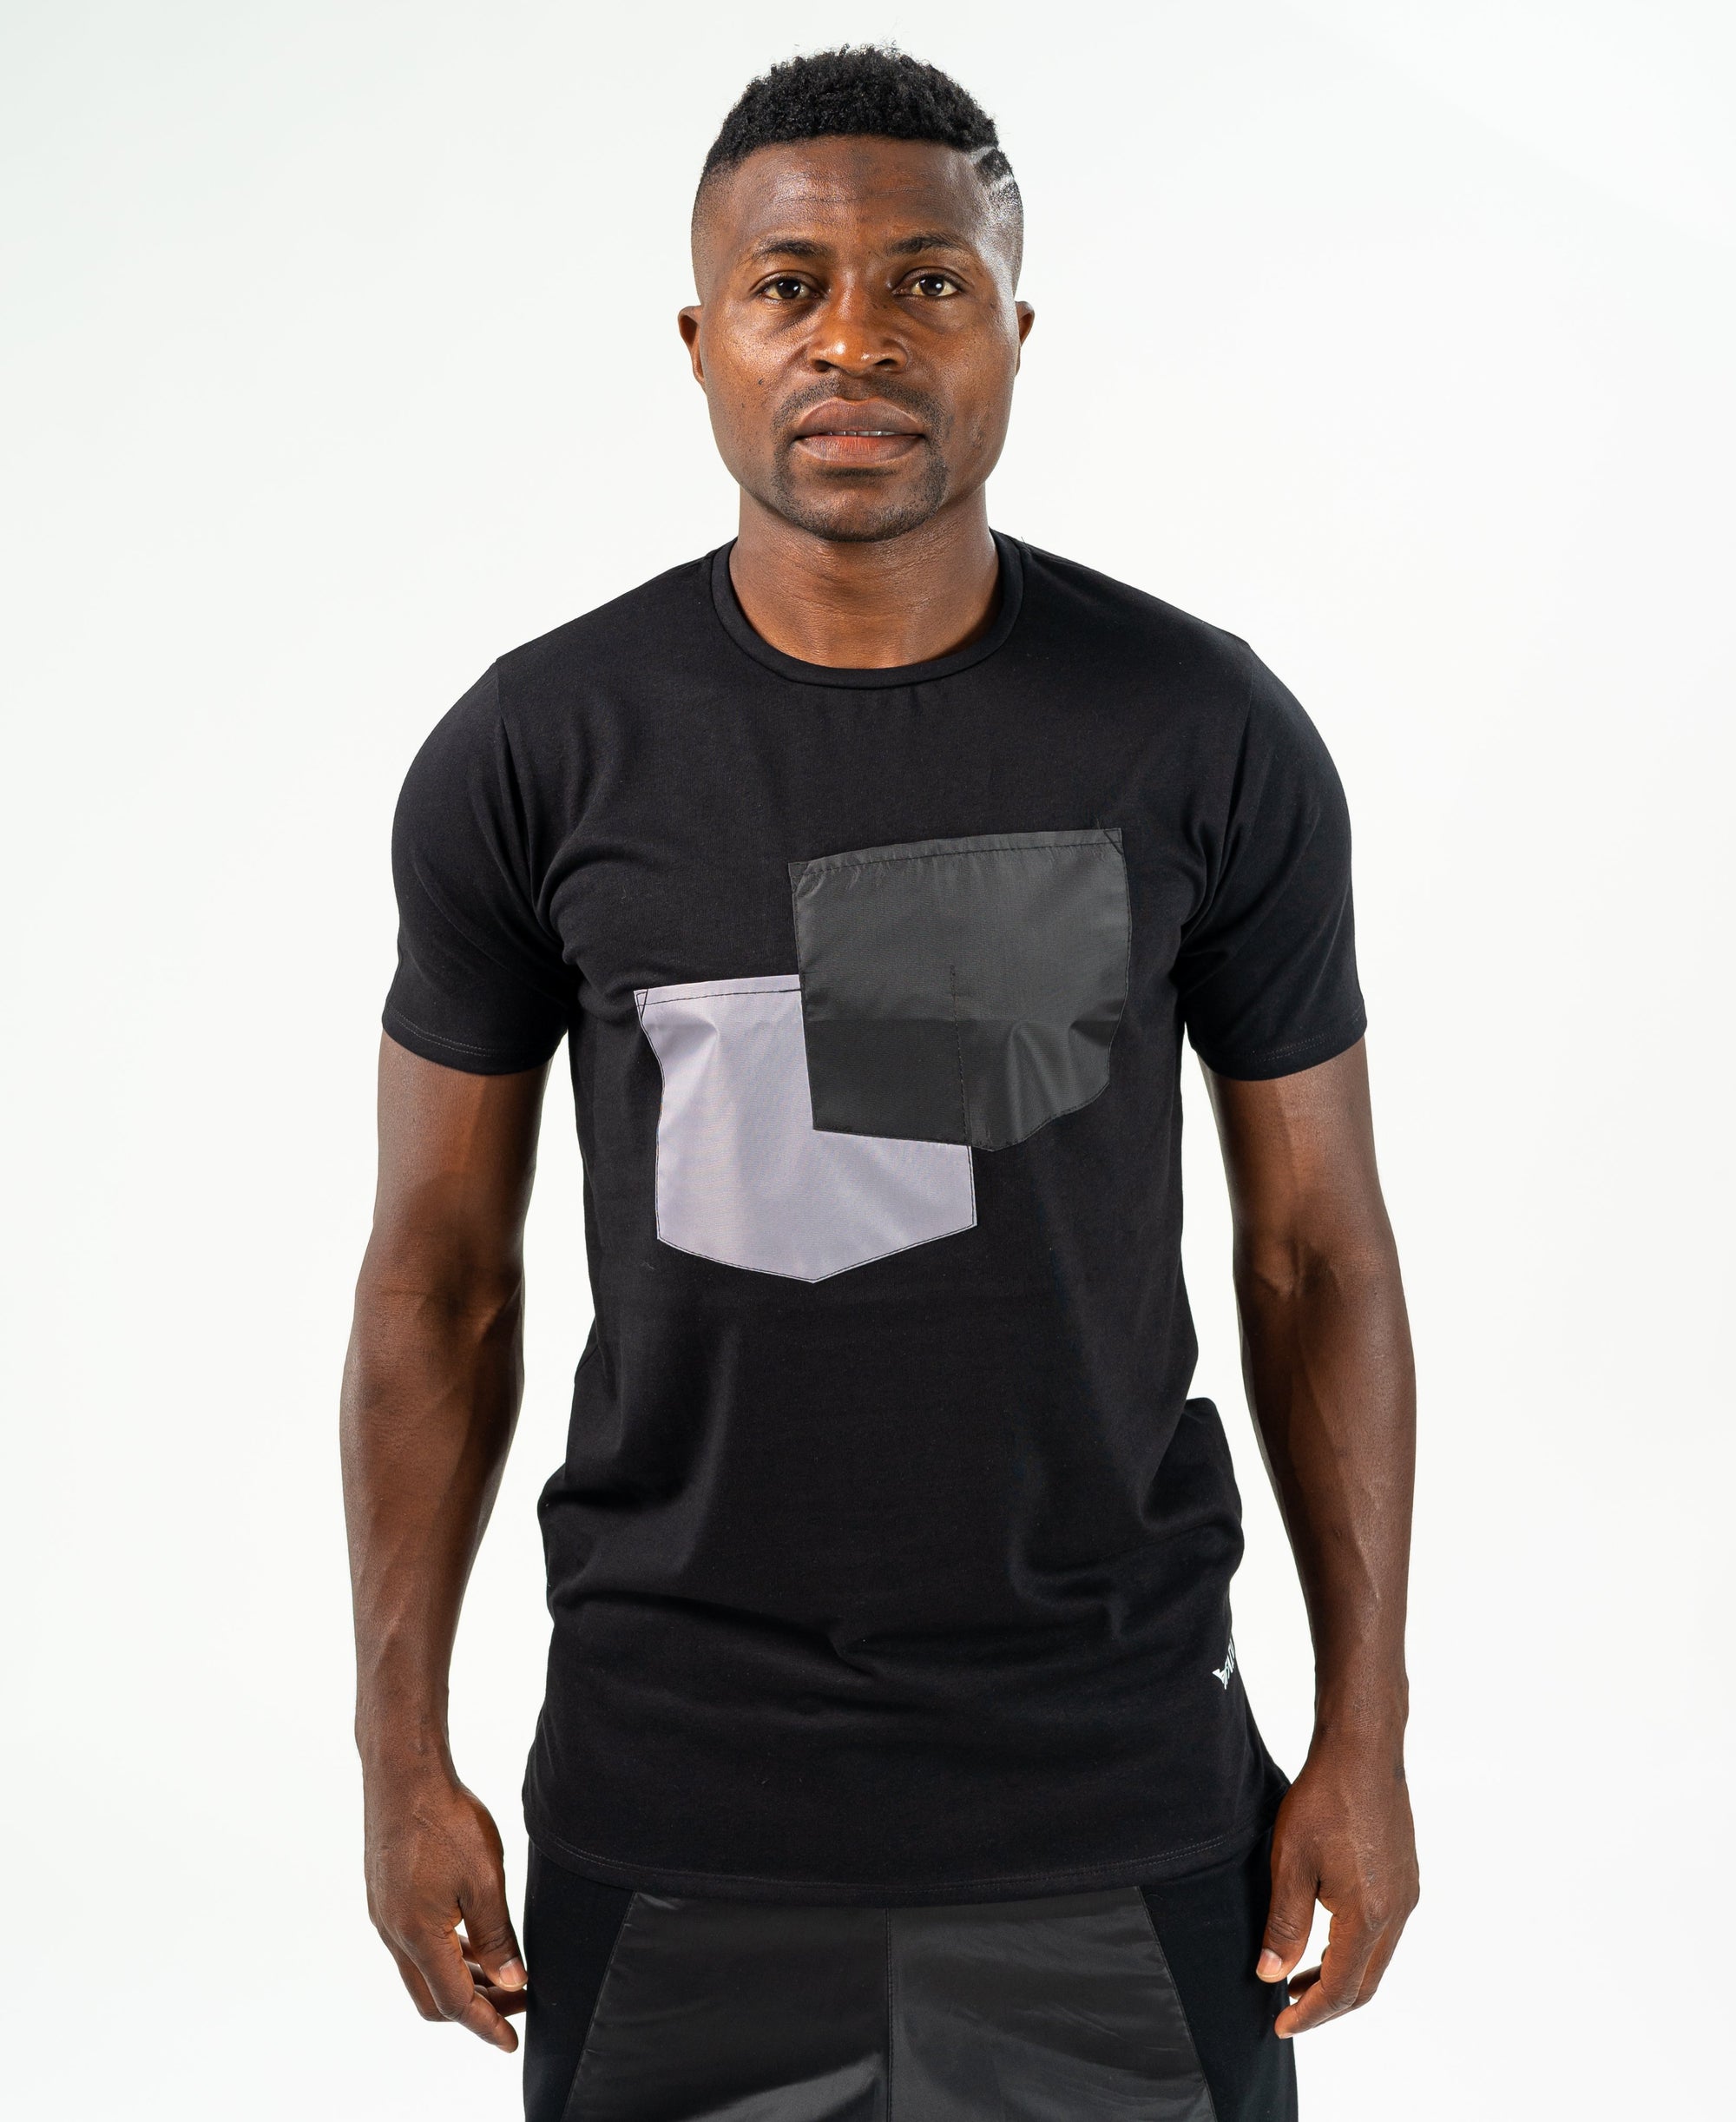 Black t-shirt with black and grey pockets - Fatai Style